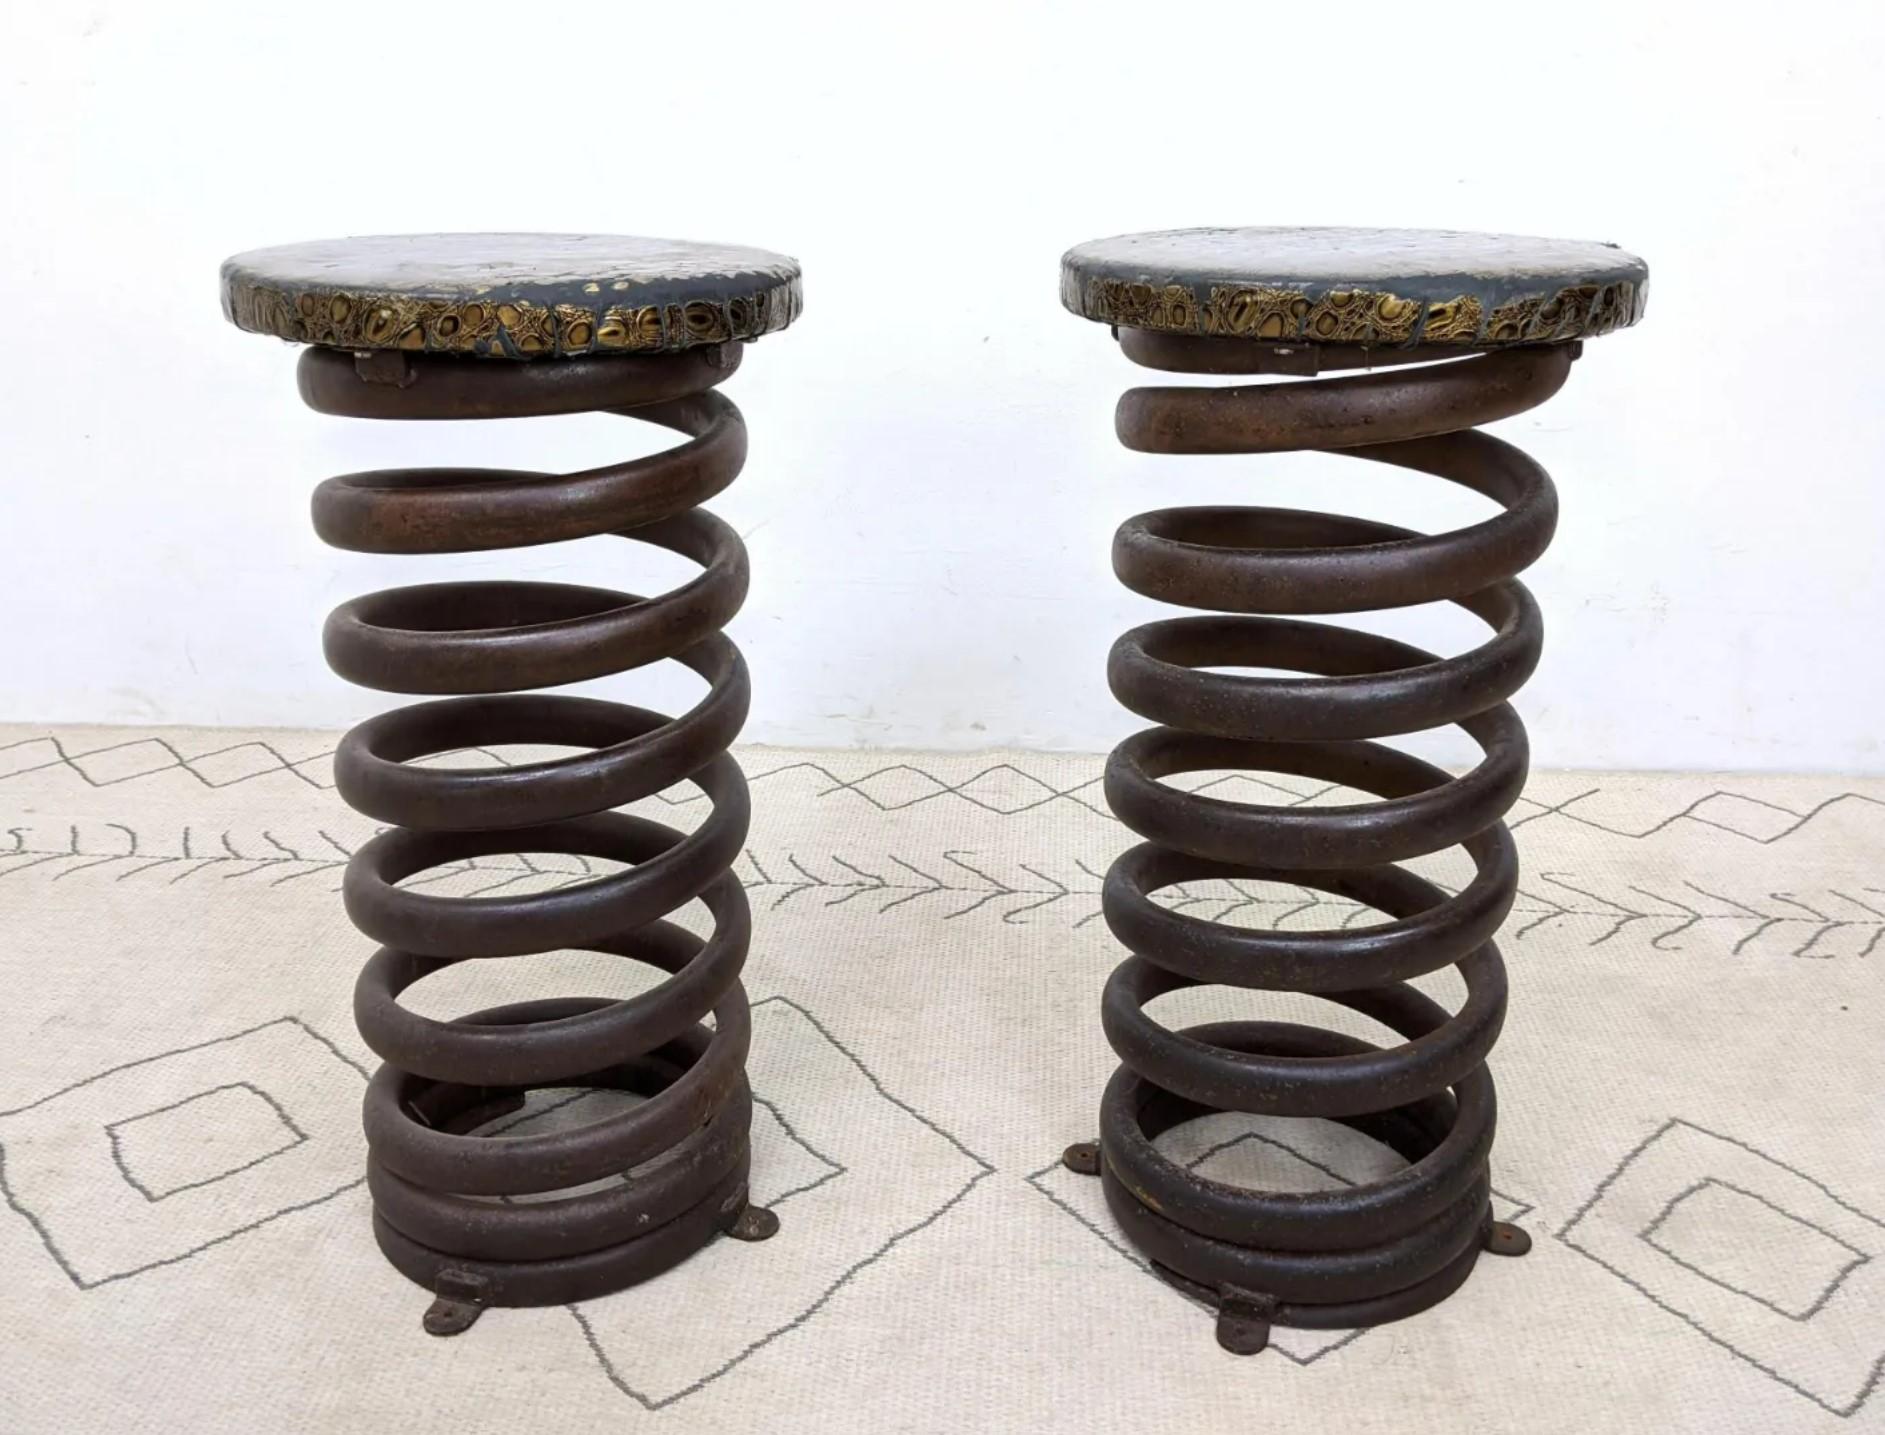 For you consideration, a super cool pair of industrial heavy steel coil or spring bar stools. Comfortable, yes! Cool, for sure! Super well-made. Sturdy and heavy. Rock the distressed Faux-leather or get them recovered. Solid and sturdy, not easy to